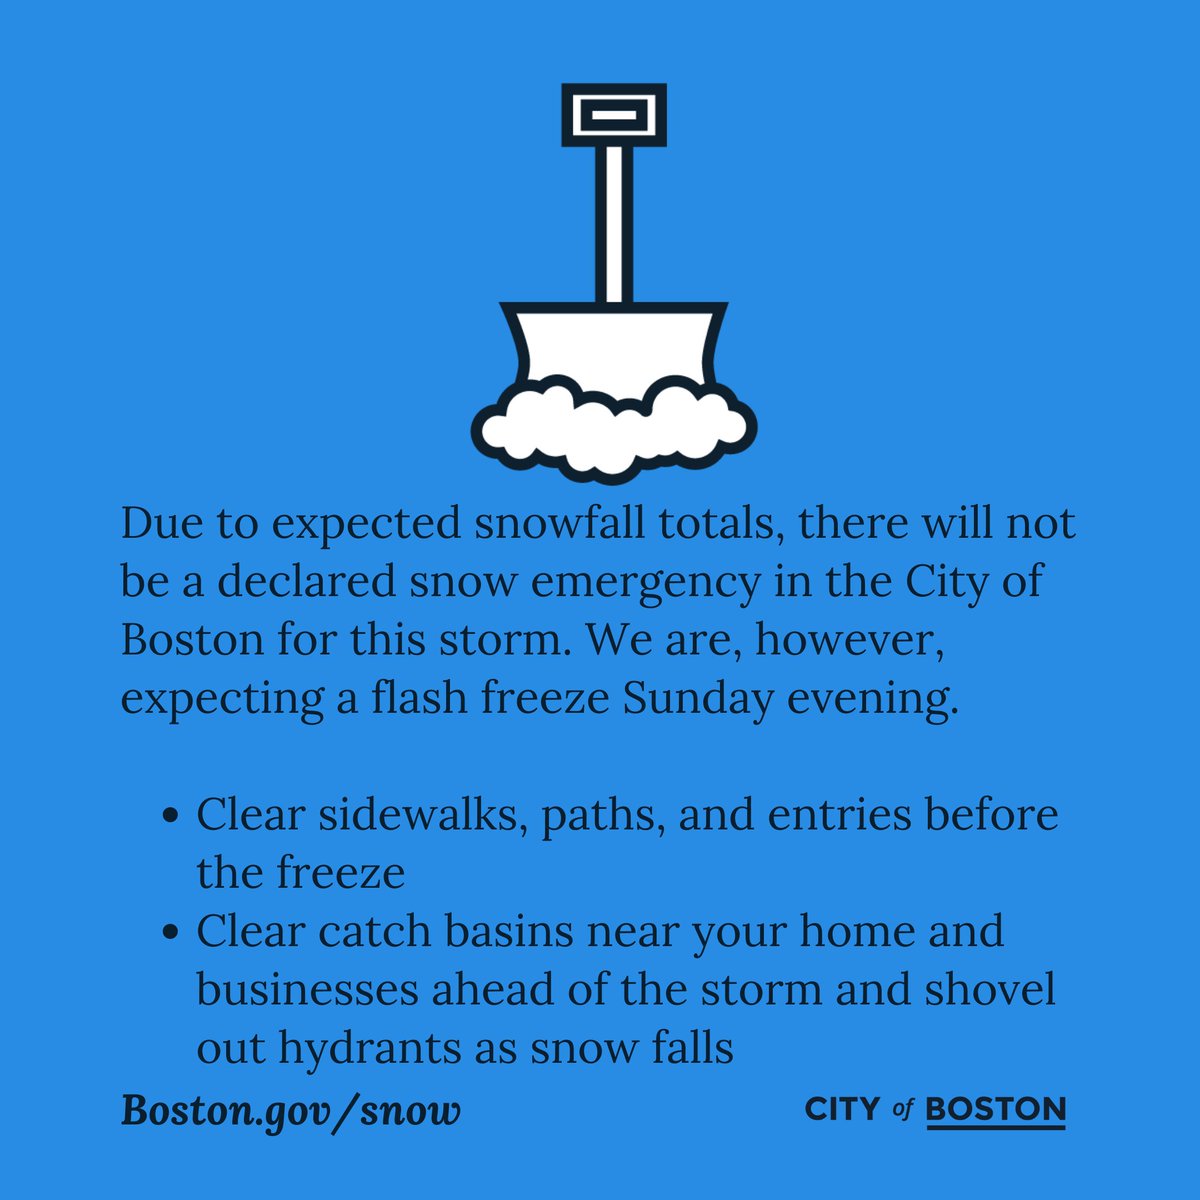 Here comes the snow, Boston! Due to expected snowfall totals, there will not be a declared snow emergency in the City of Boston for this storm.